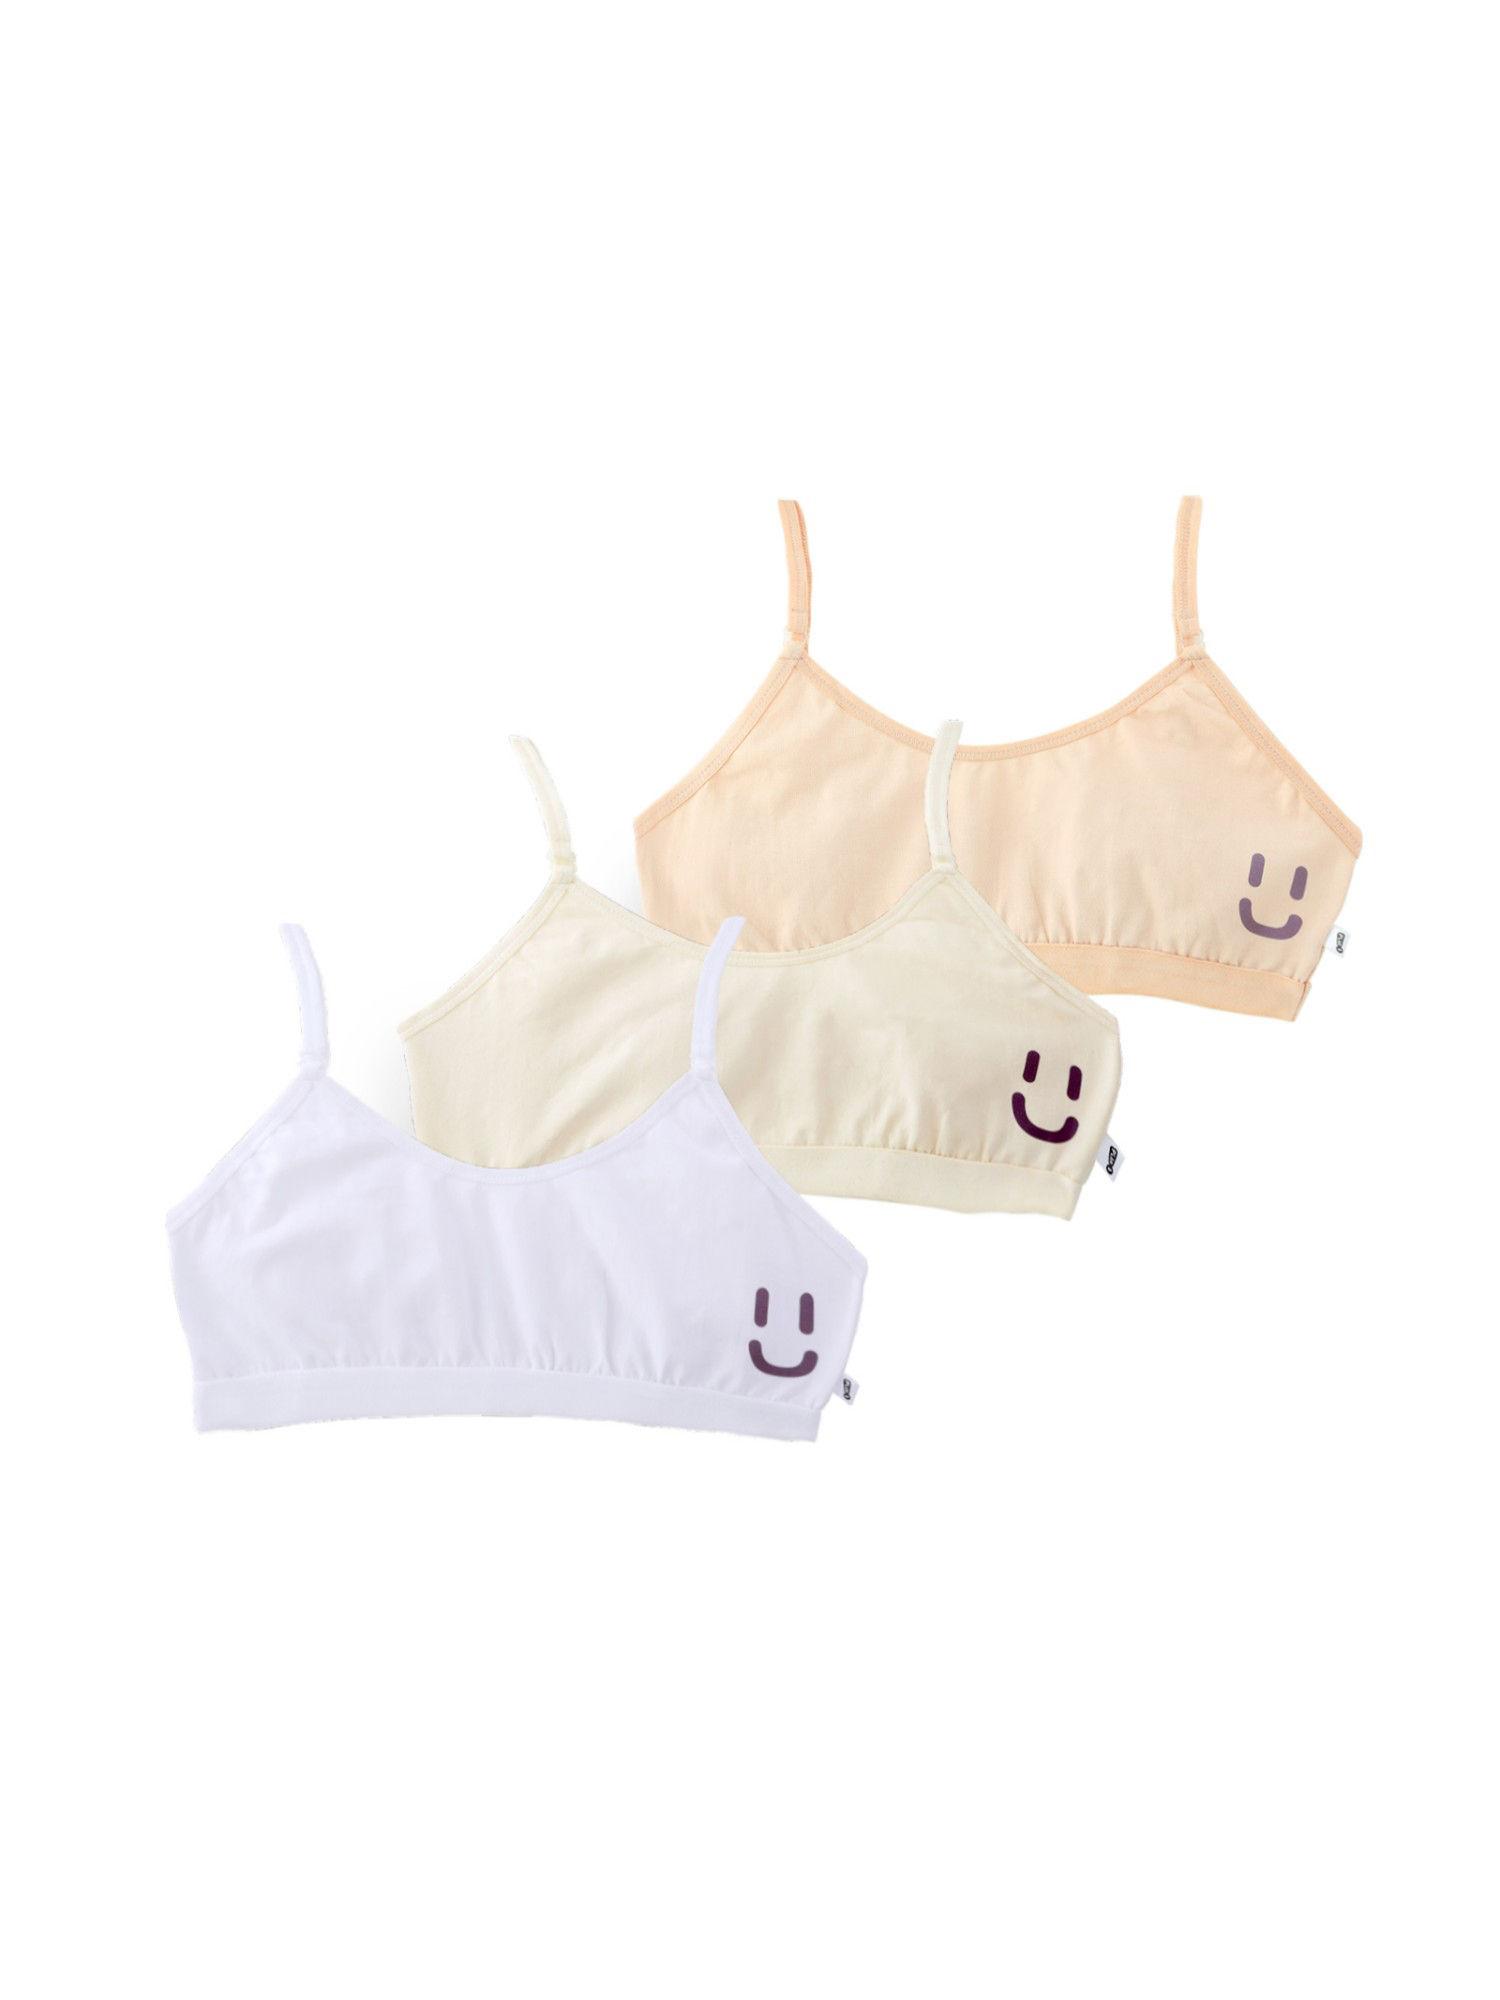 smiley - training bras (pack of 3)